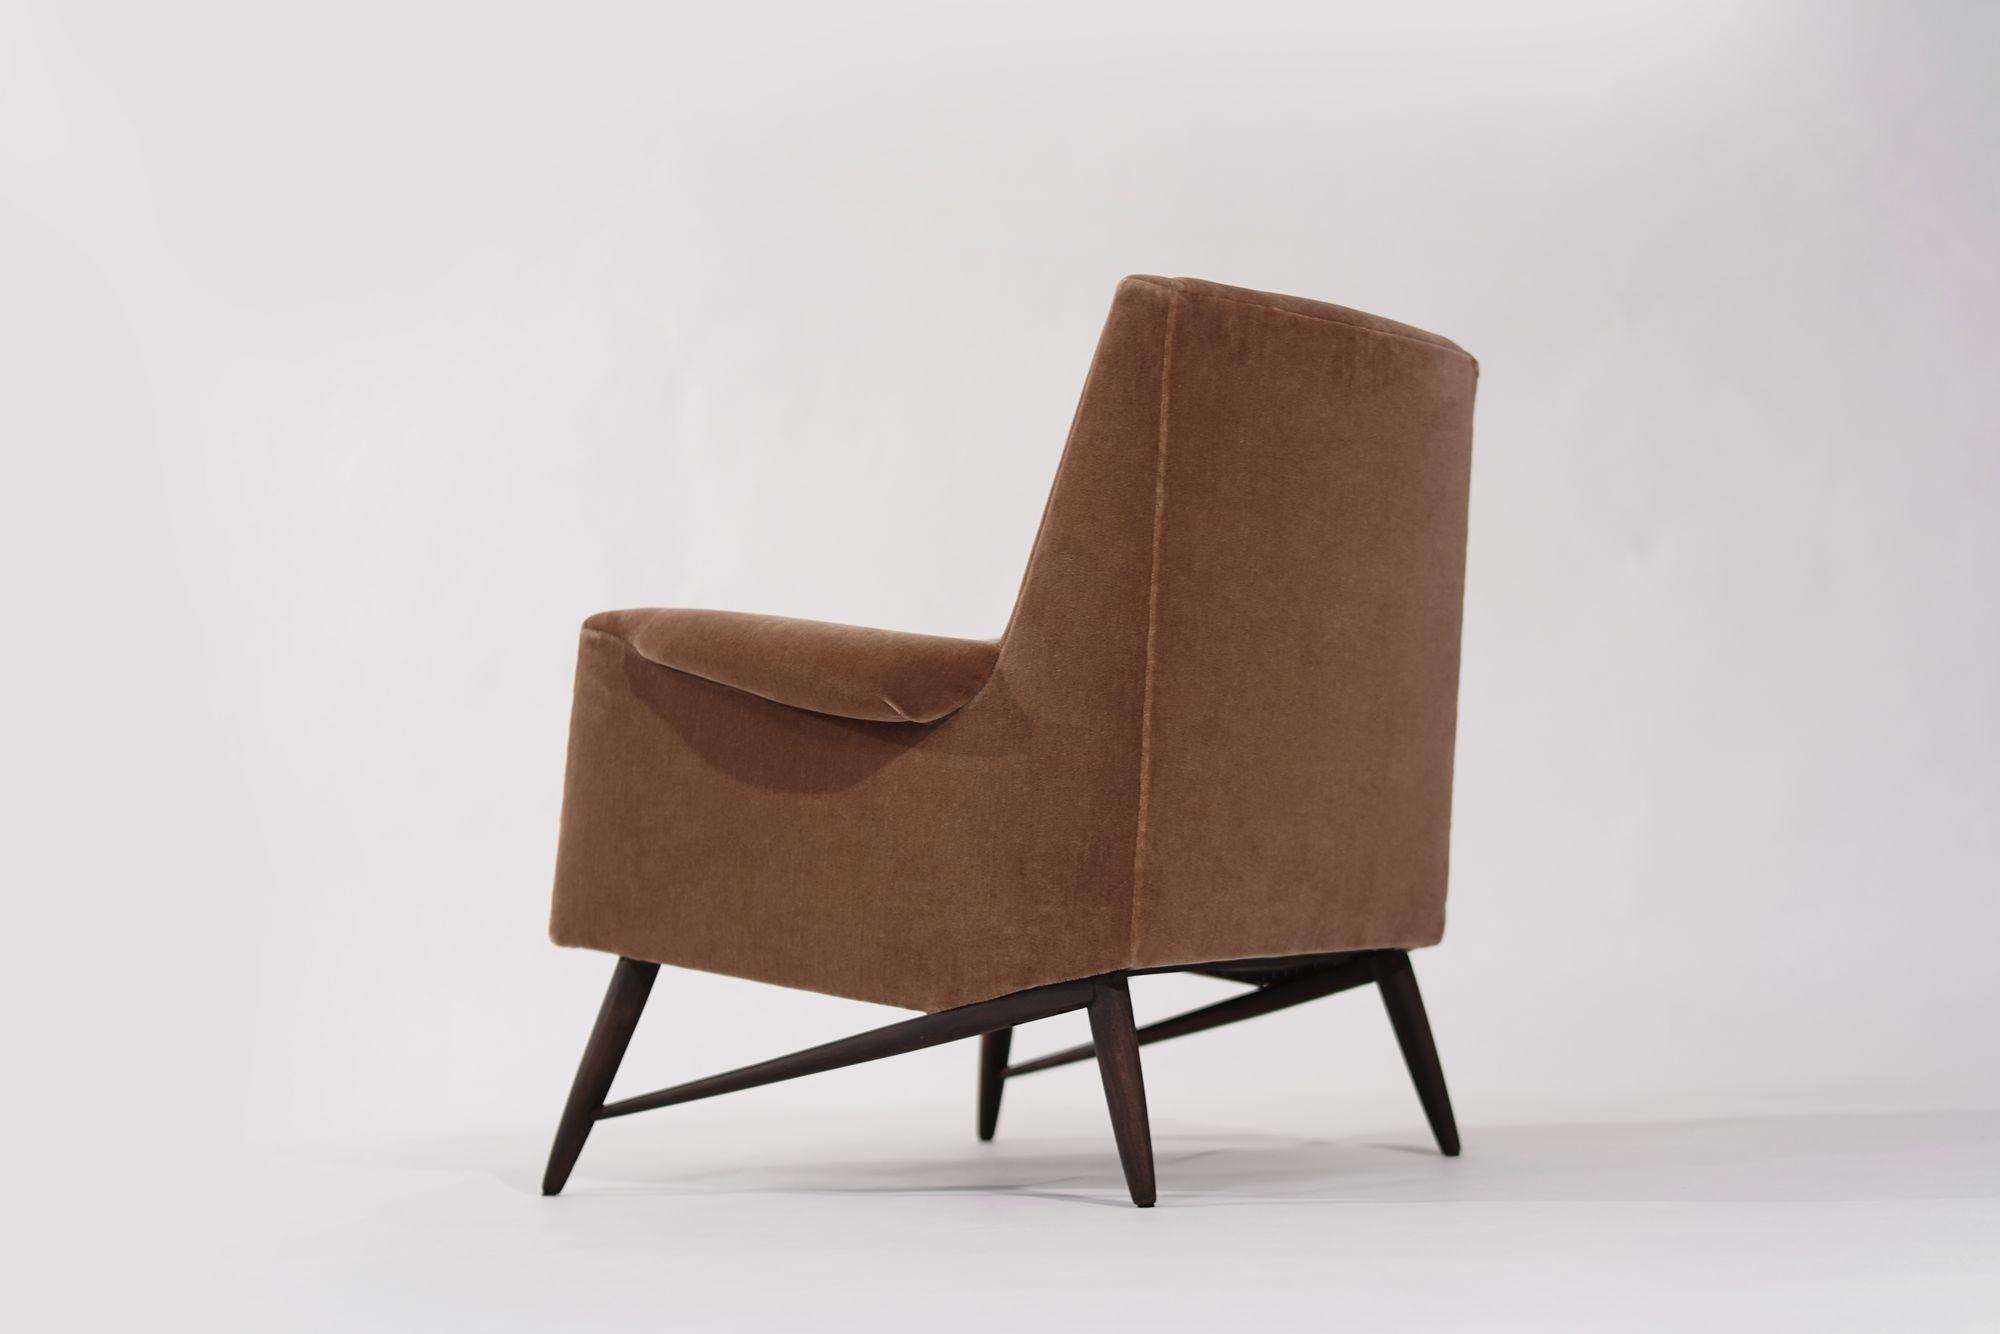 American Scandinavian Modern Lounge Chair in Gold Mohair, C. 1950s For Sale